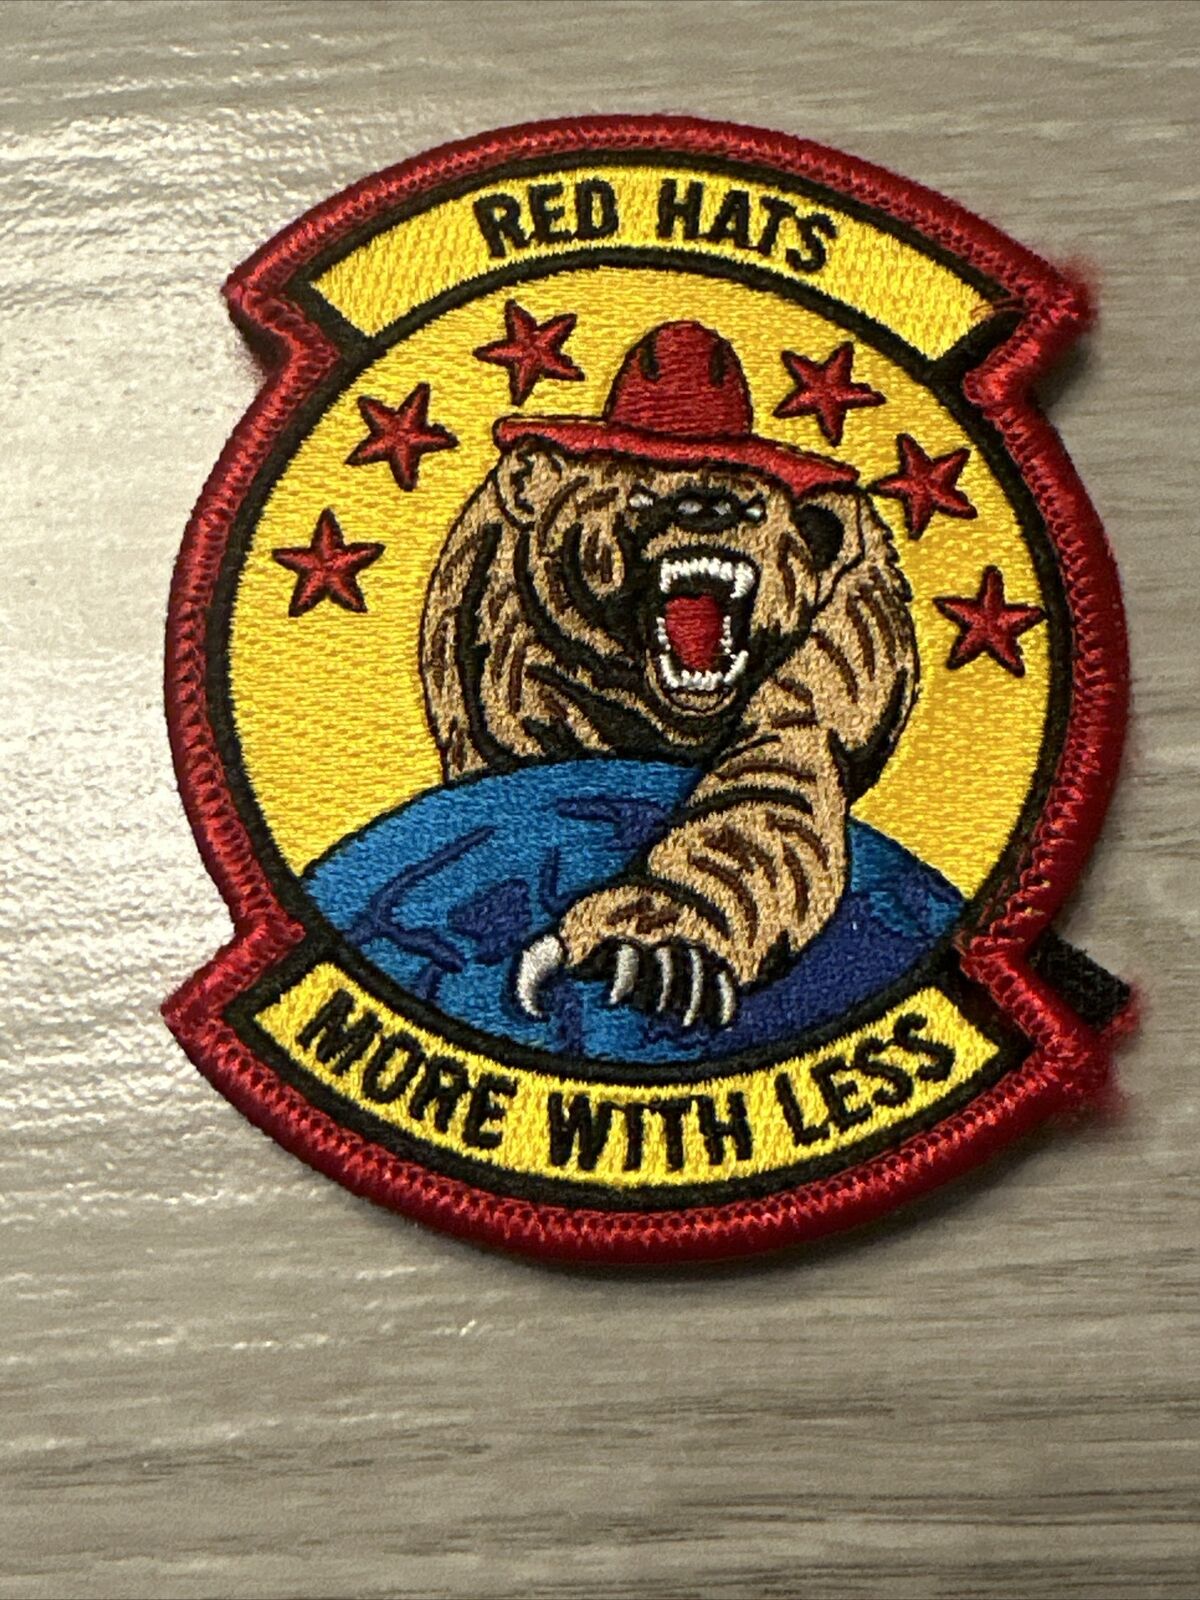 Usaf Patch: Classified Red Hat Unit Patch